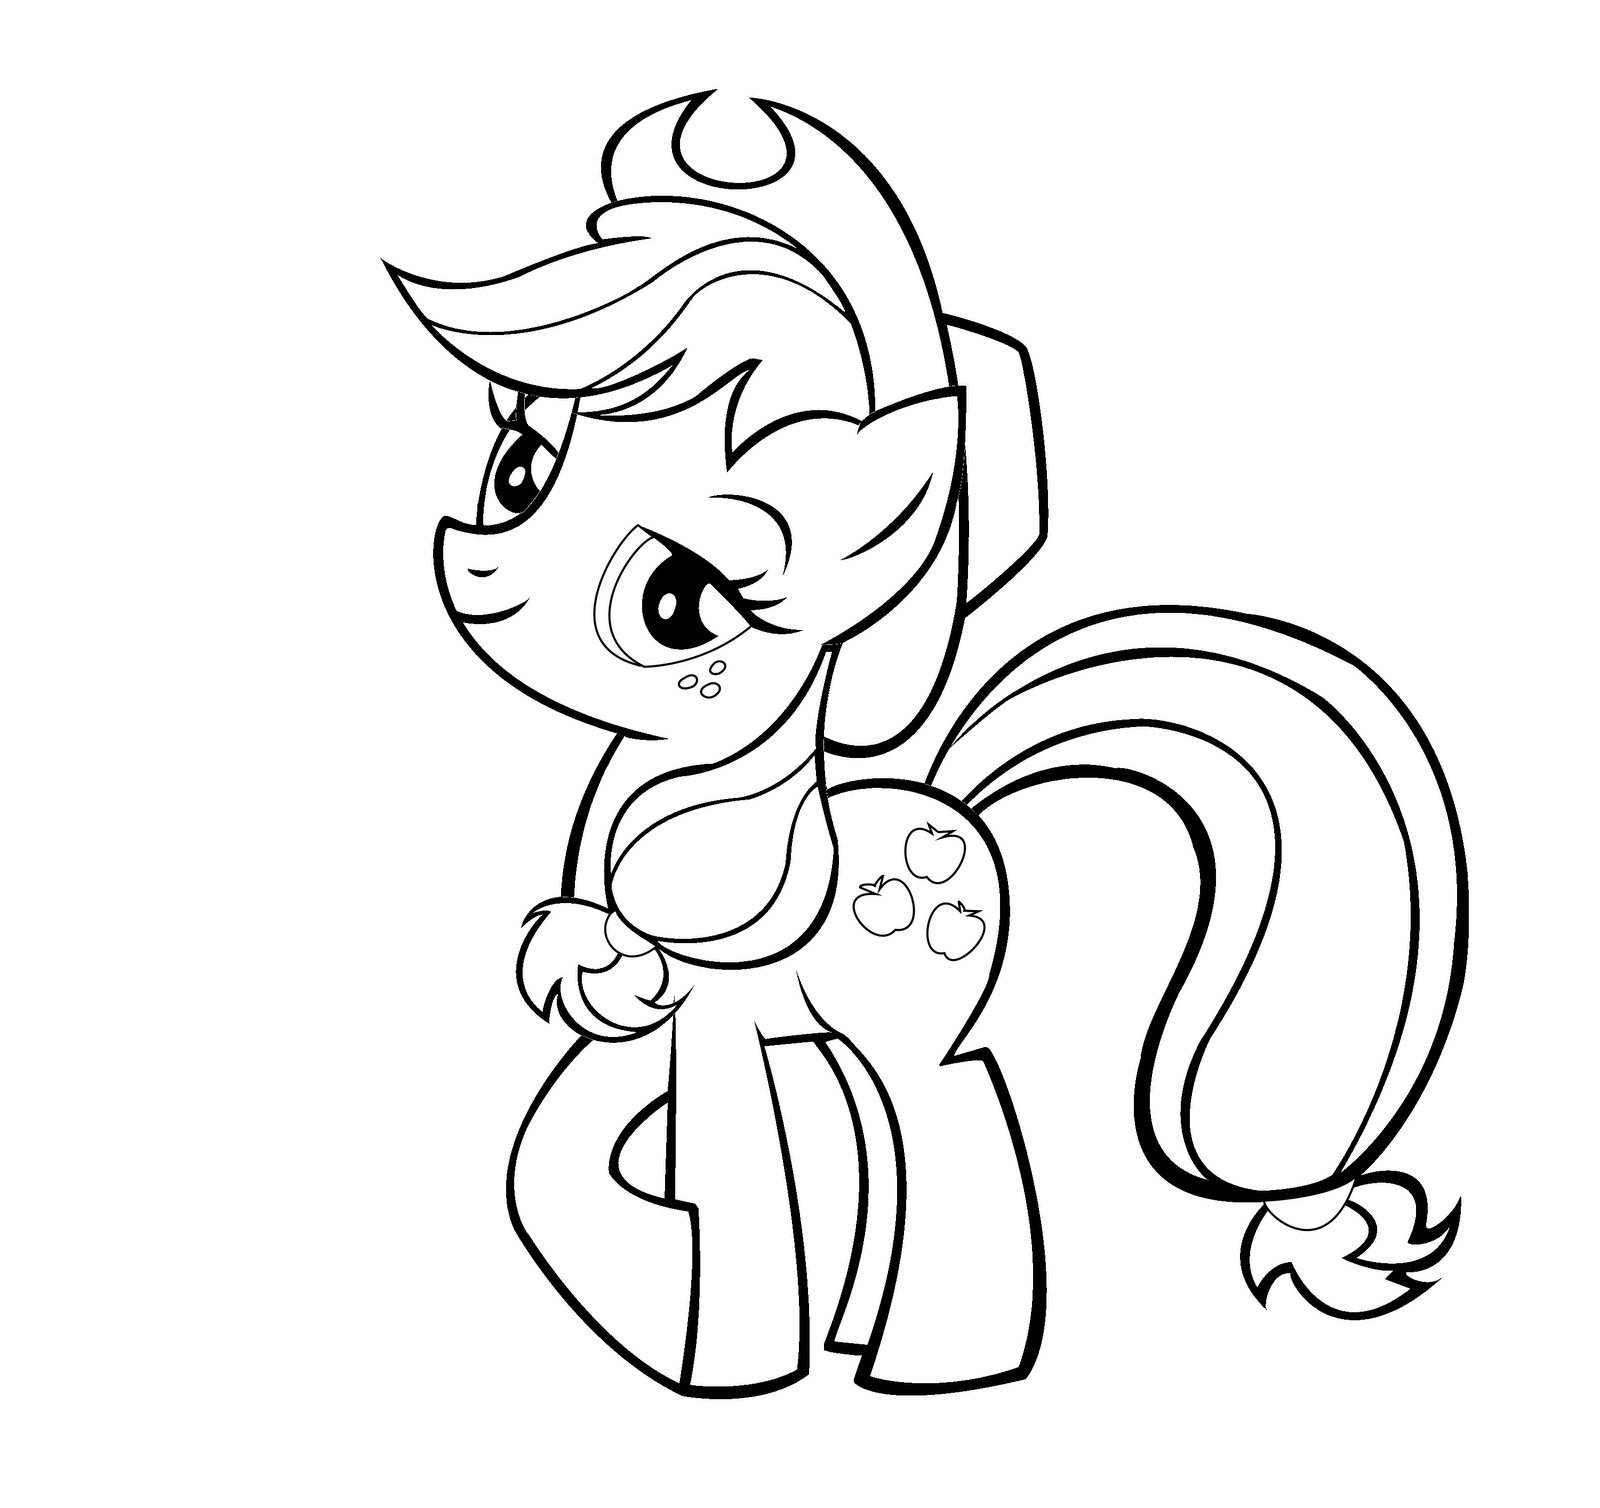 Applejack - Coloring Pages for Kids and for Adults